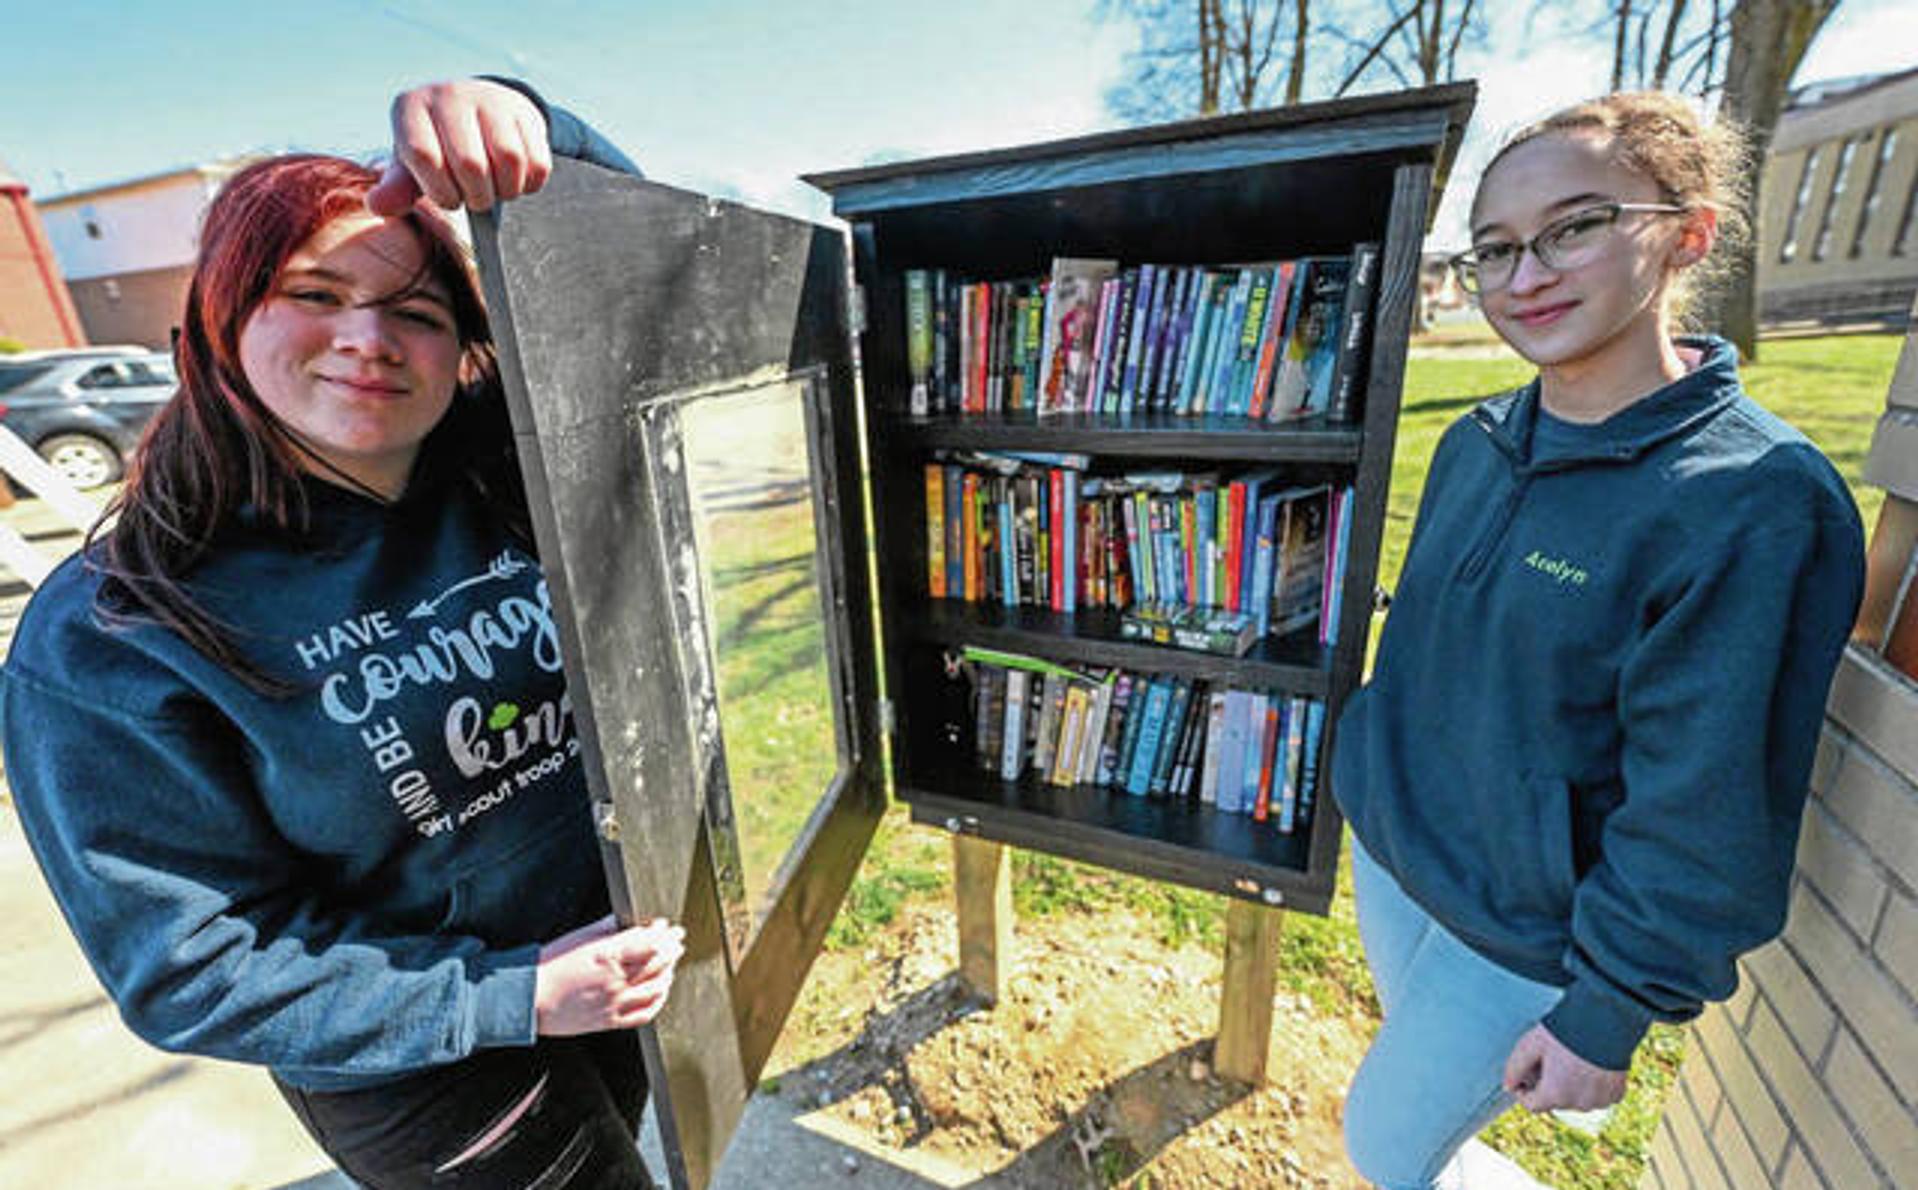 Two teenage girls standing next to a little free library box.